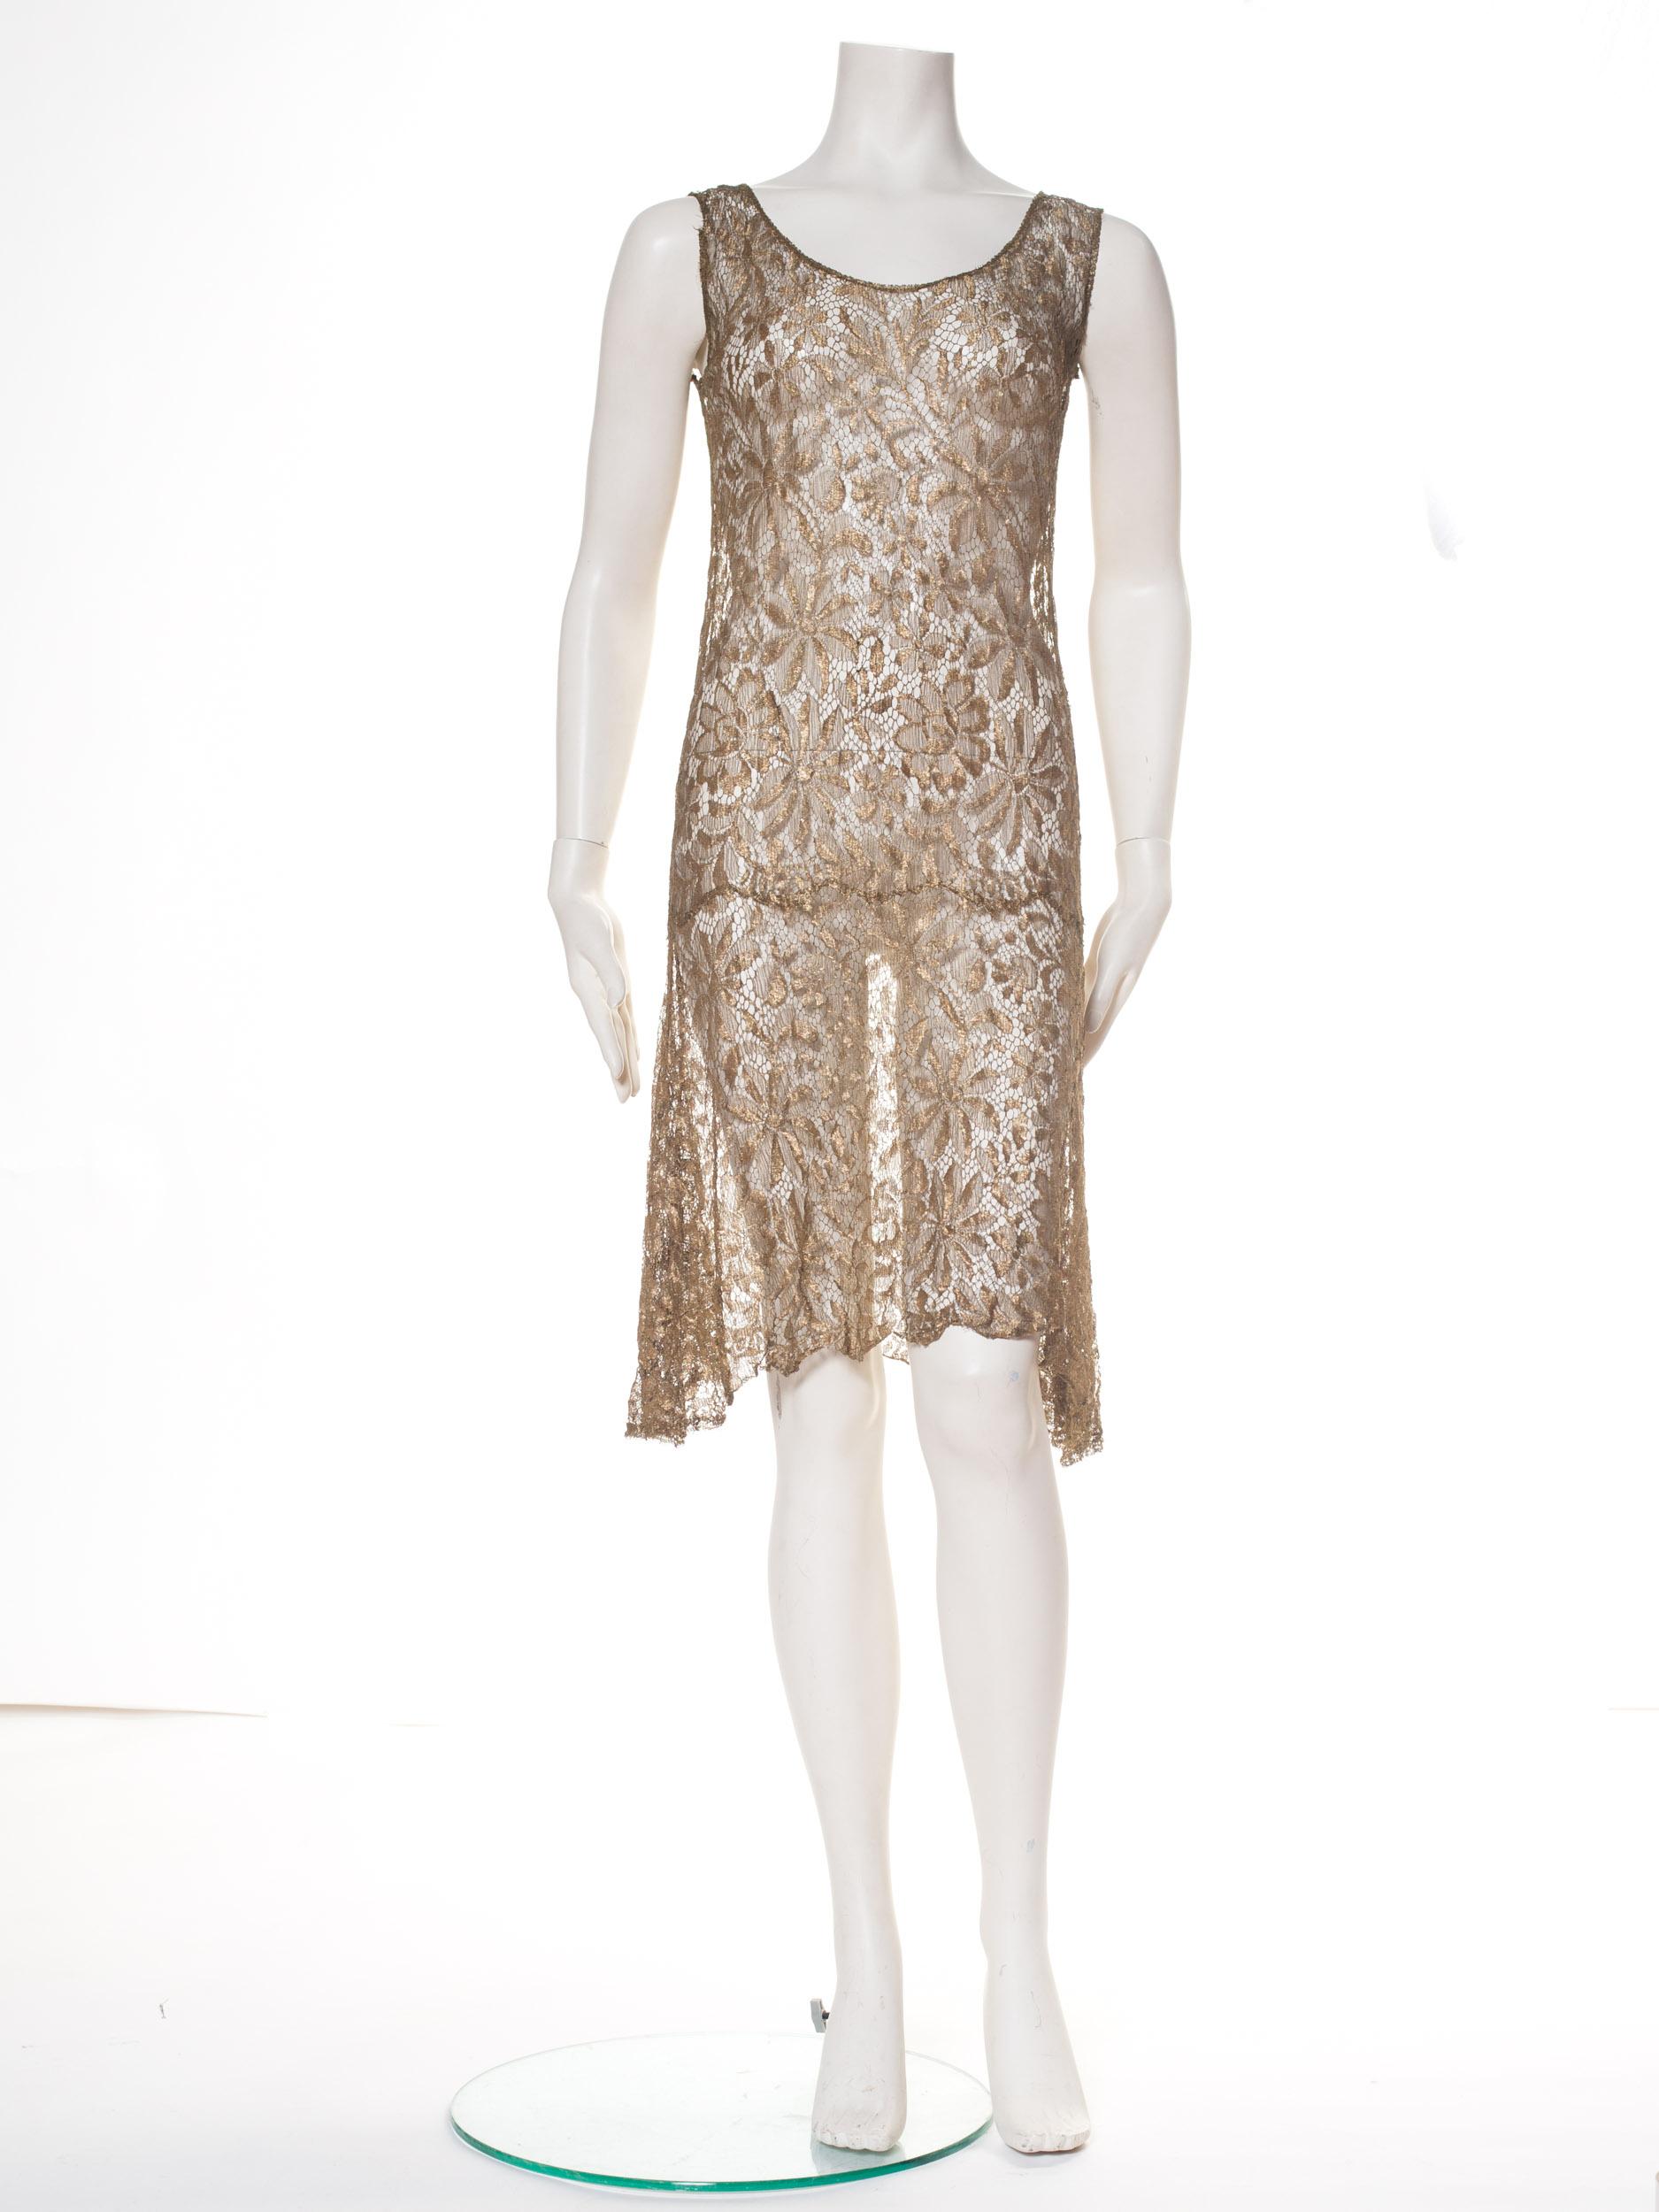 Beautiful golden metal lamé lace dress from the 1920s, picked up in Paris and ready to travel the world of parties. 